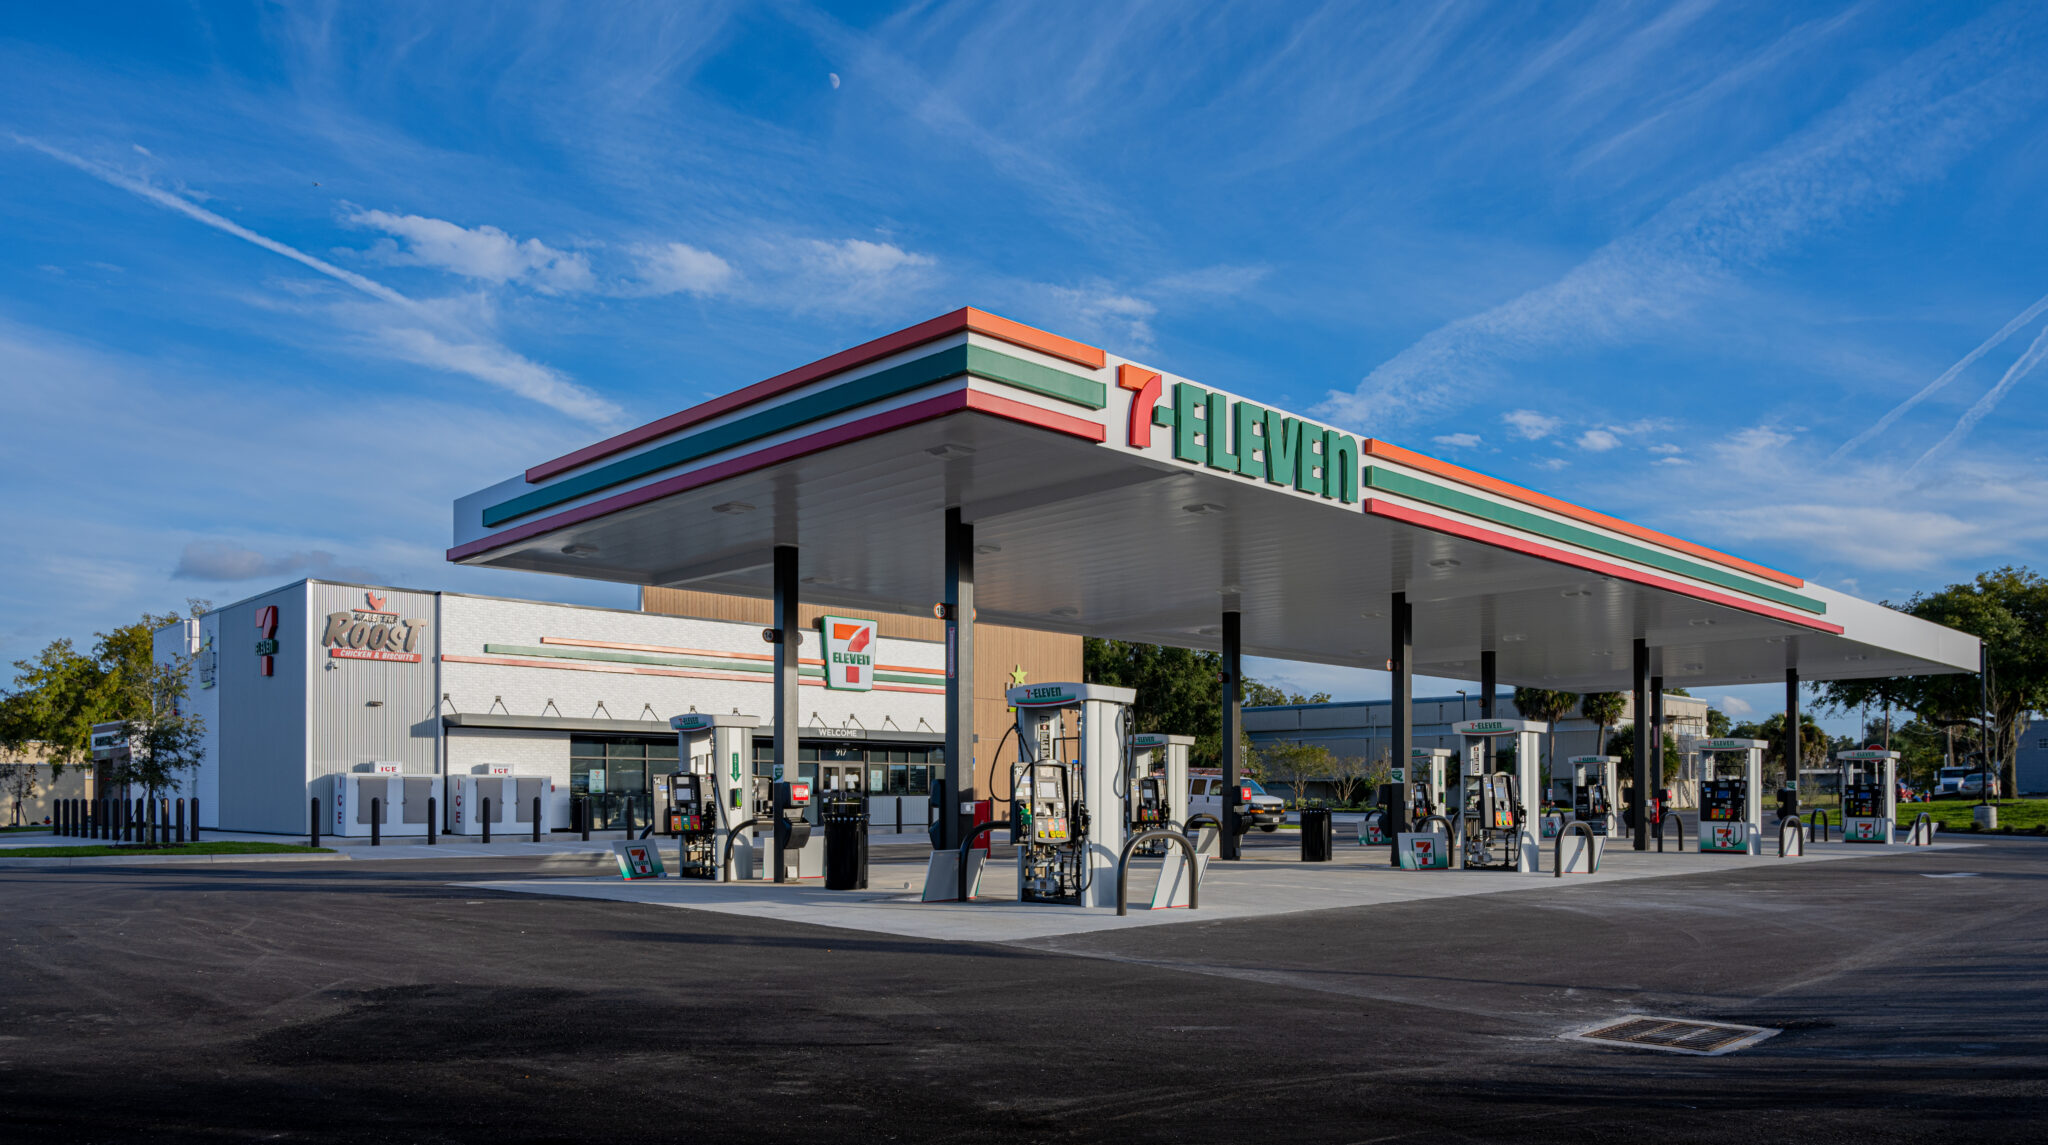 7-eleven has been targeted by scammers.